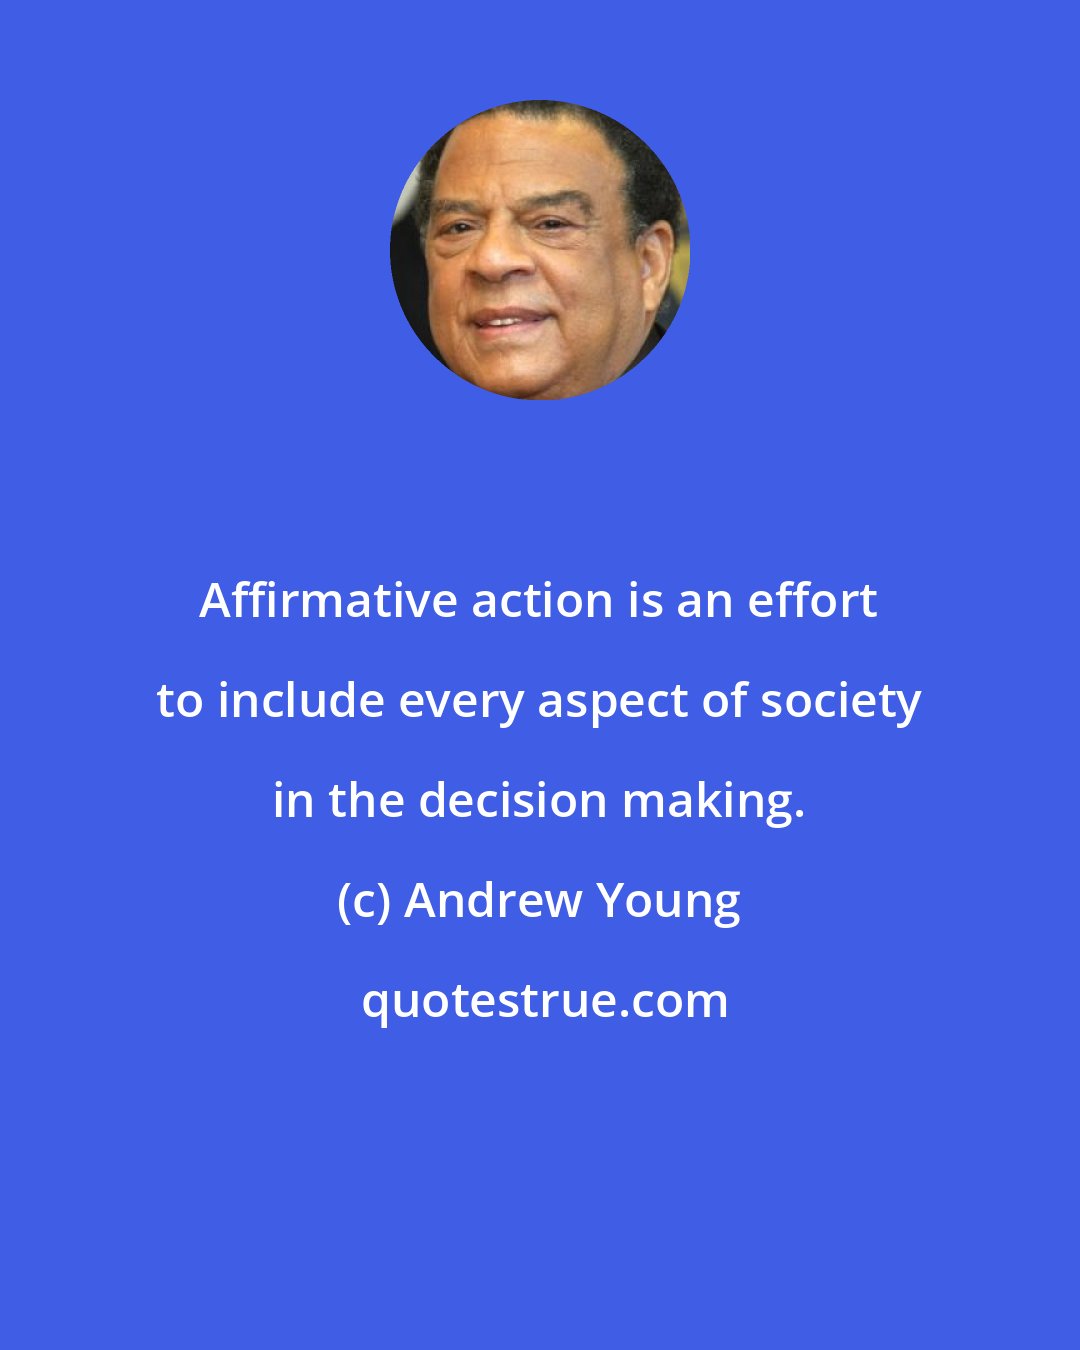 Andrew Young: Affirmative action is an effort to include every aspect of society in the decision making.